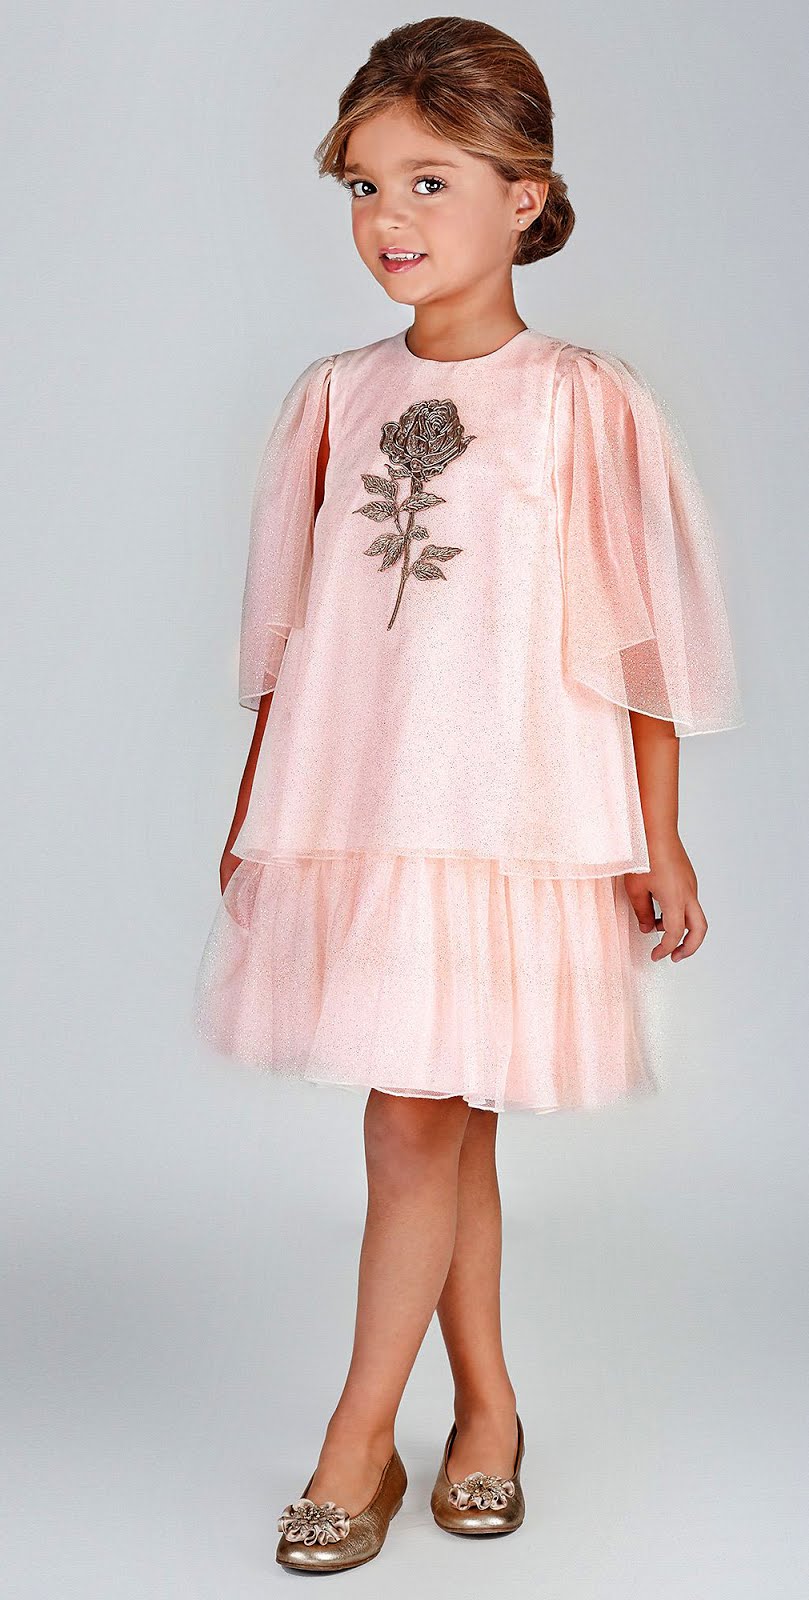 Must Have of the Day: Gorgeous special occasion by Graci